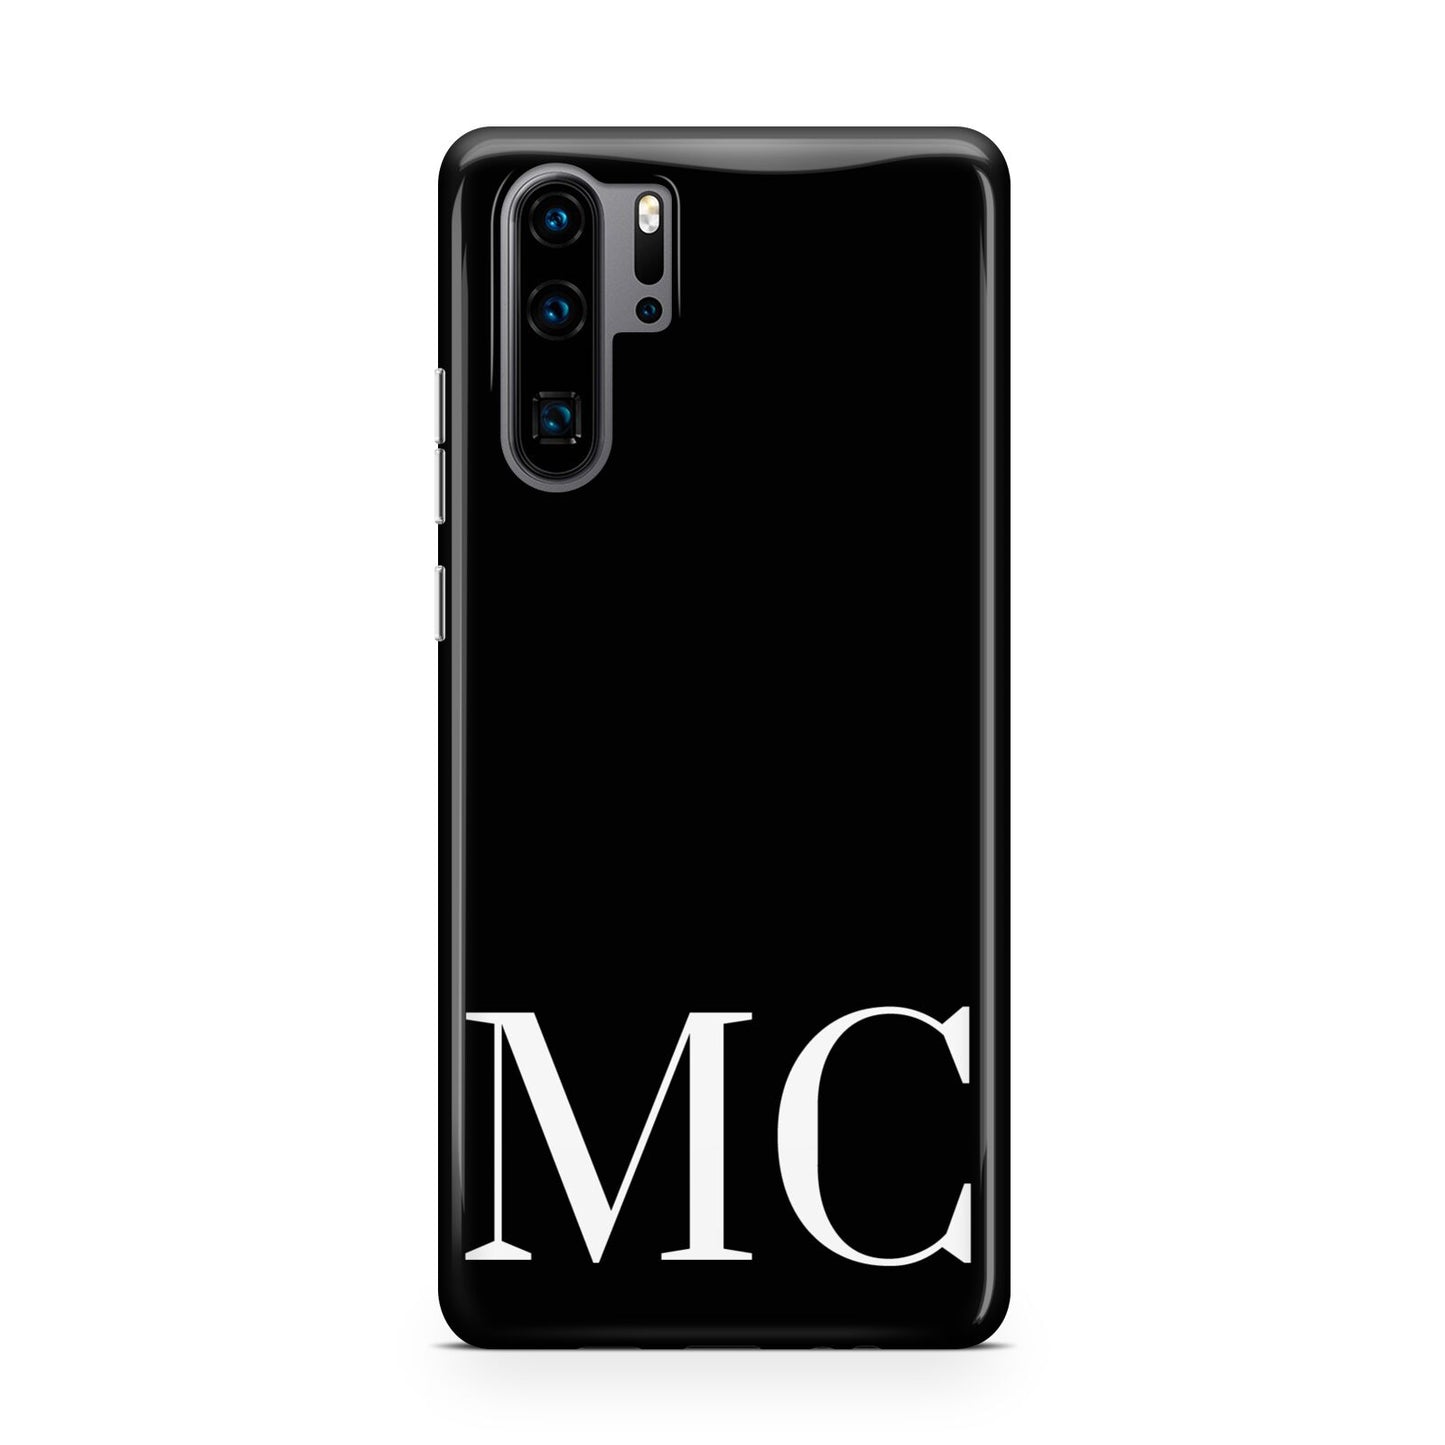 Initials Personalised 1 Huawei P30 Pro Phone Case